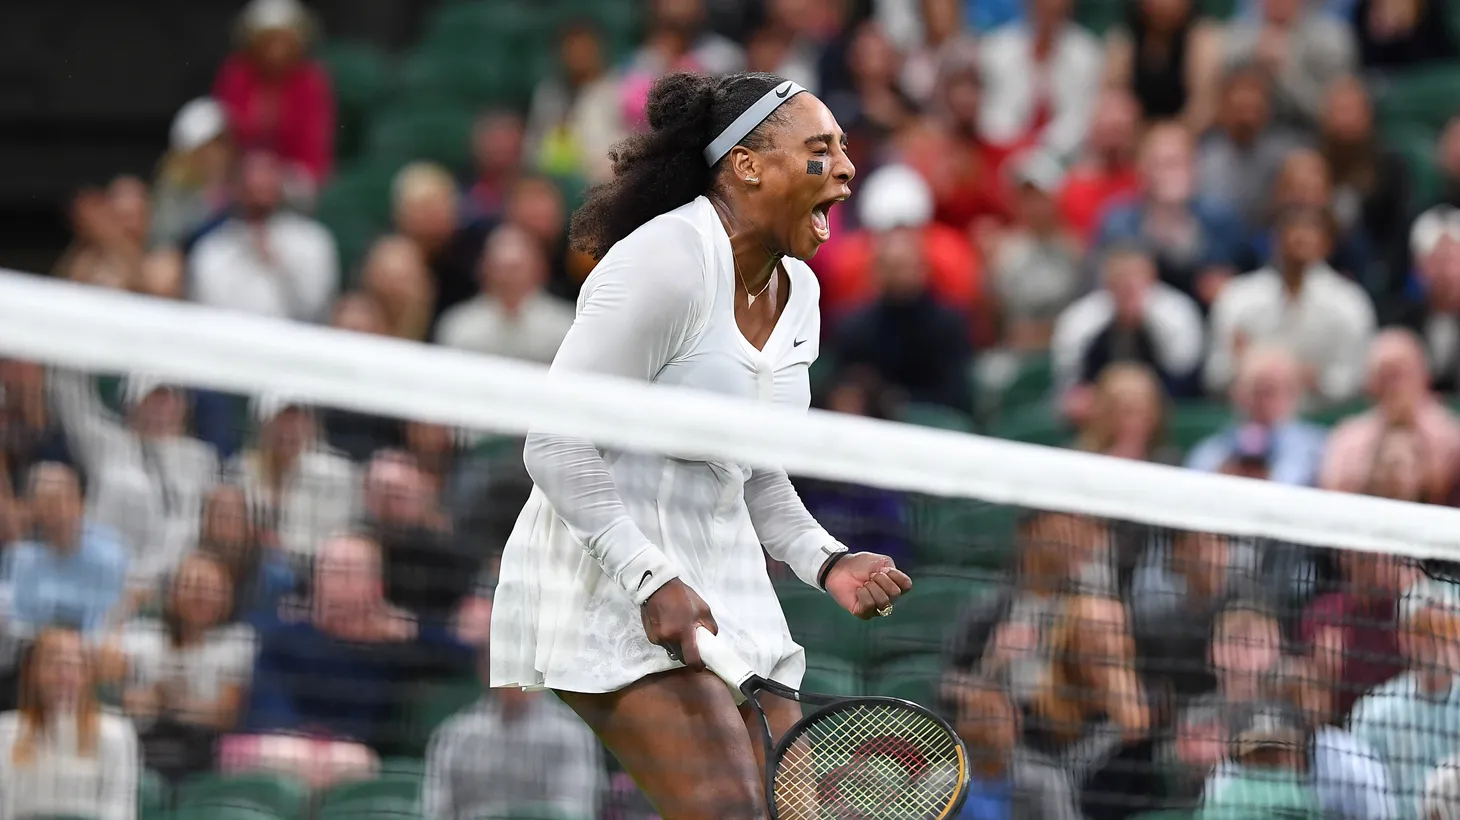 Serena Williams is out at Wimbledon, but her dominance is unreal